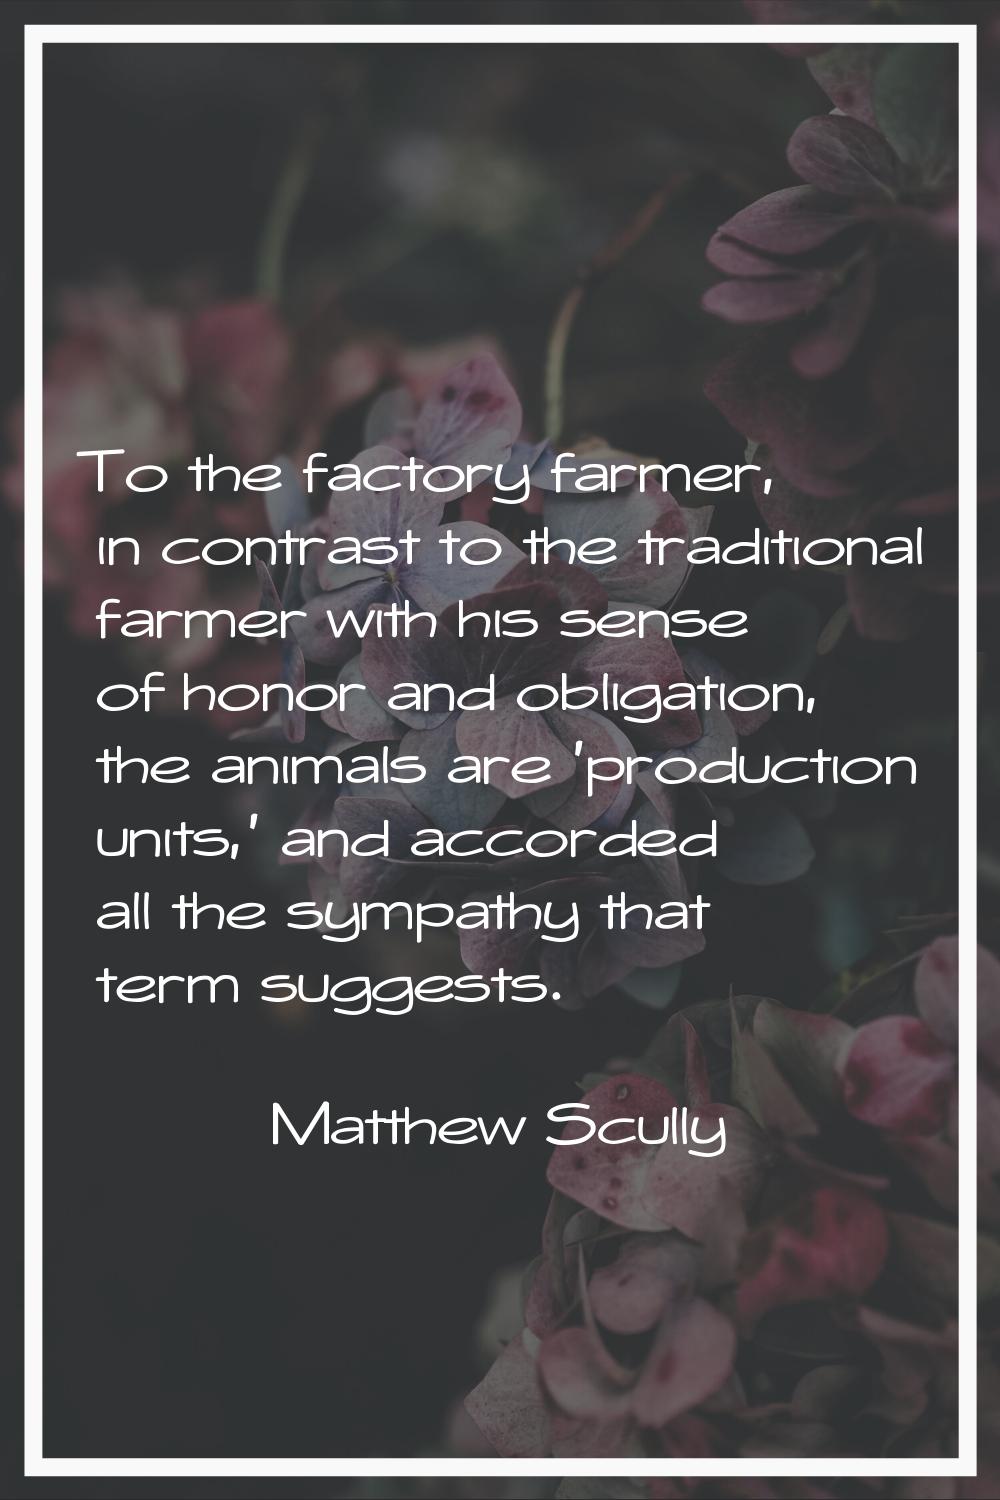 To the factory farmer, in contrast to the traditional farmer with his sense of honor and obligation